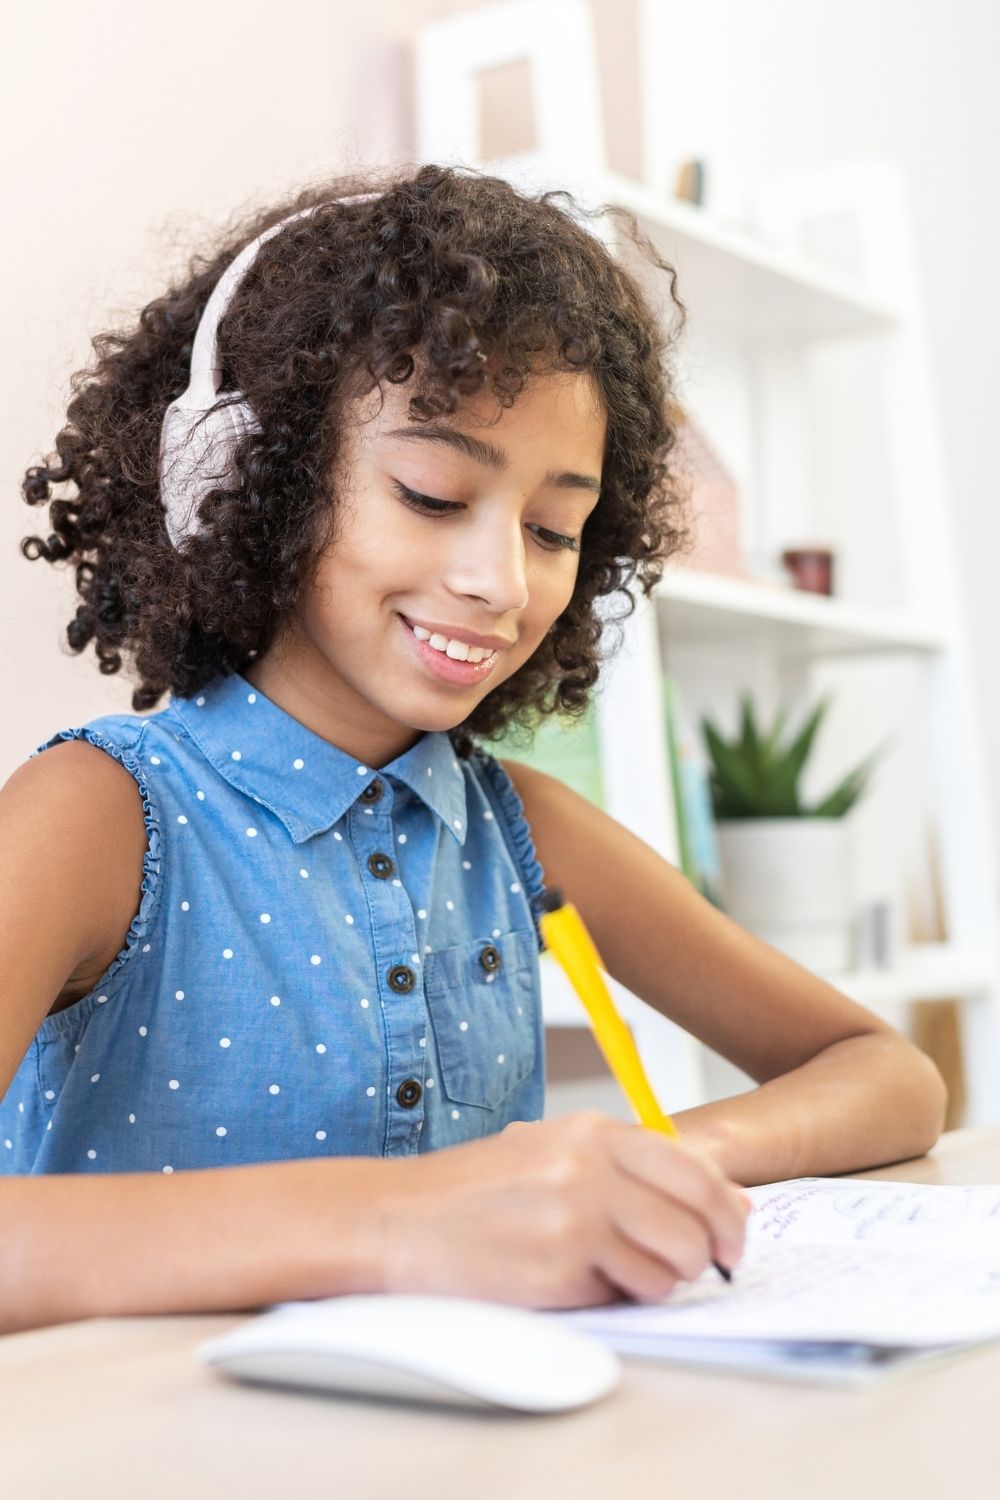 How To Encourage Your Gifted Child To Apply Themselves